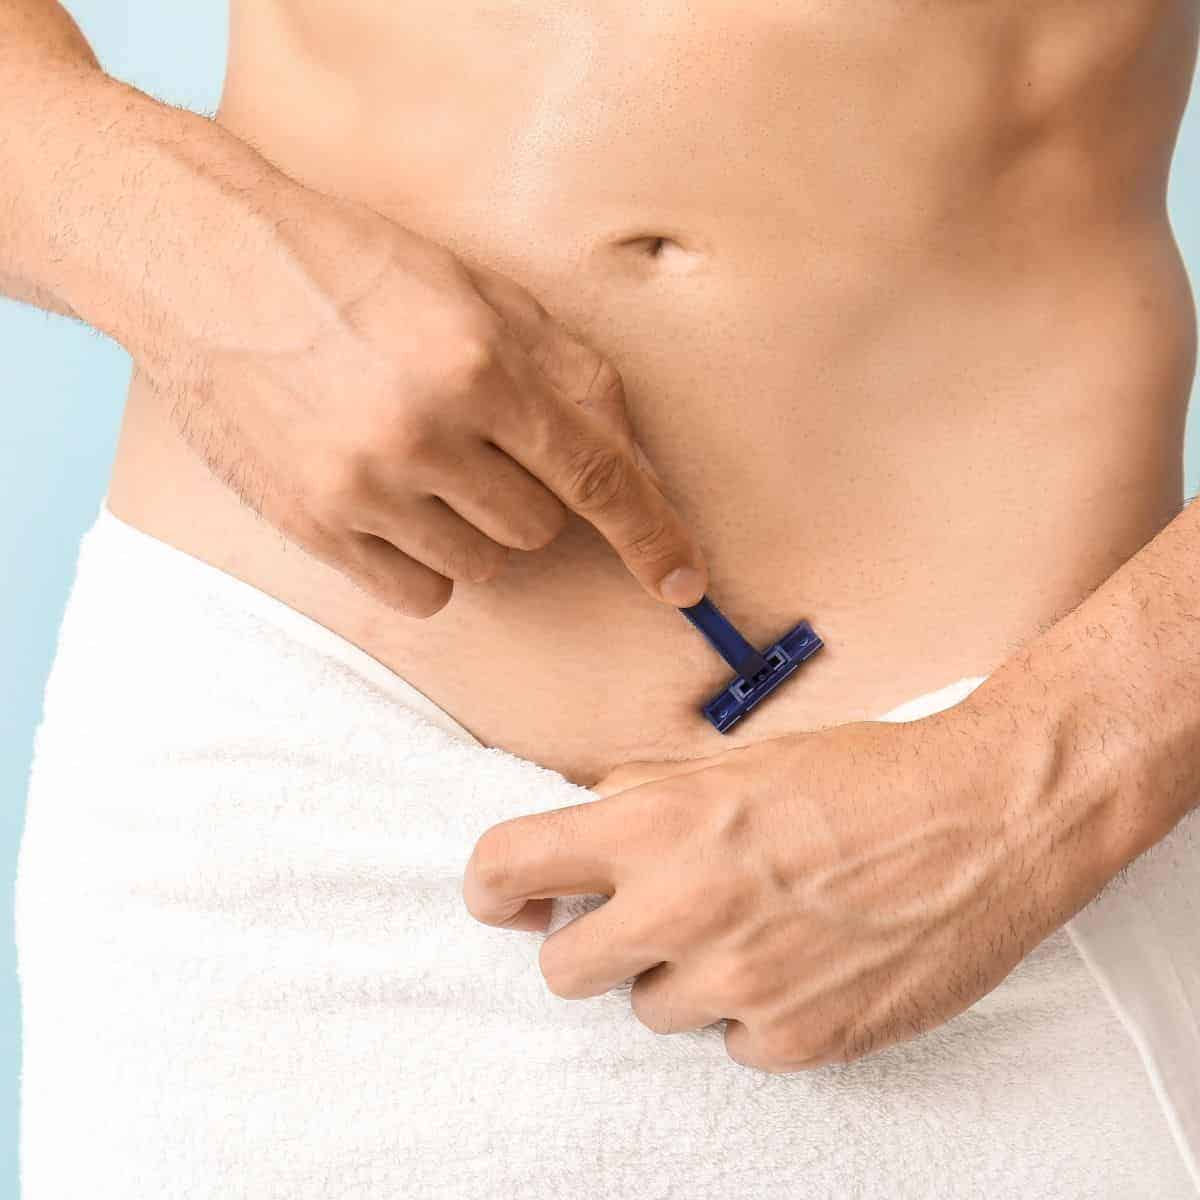 Person wearing a towel and shaving their abdomen.